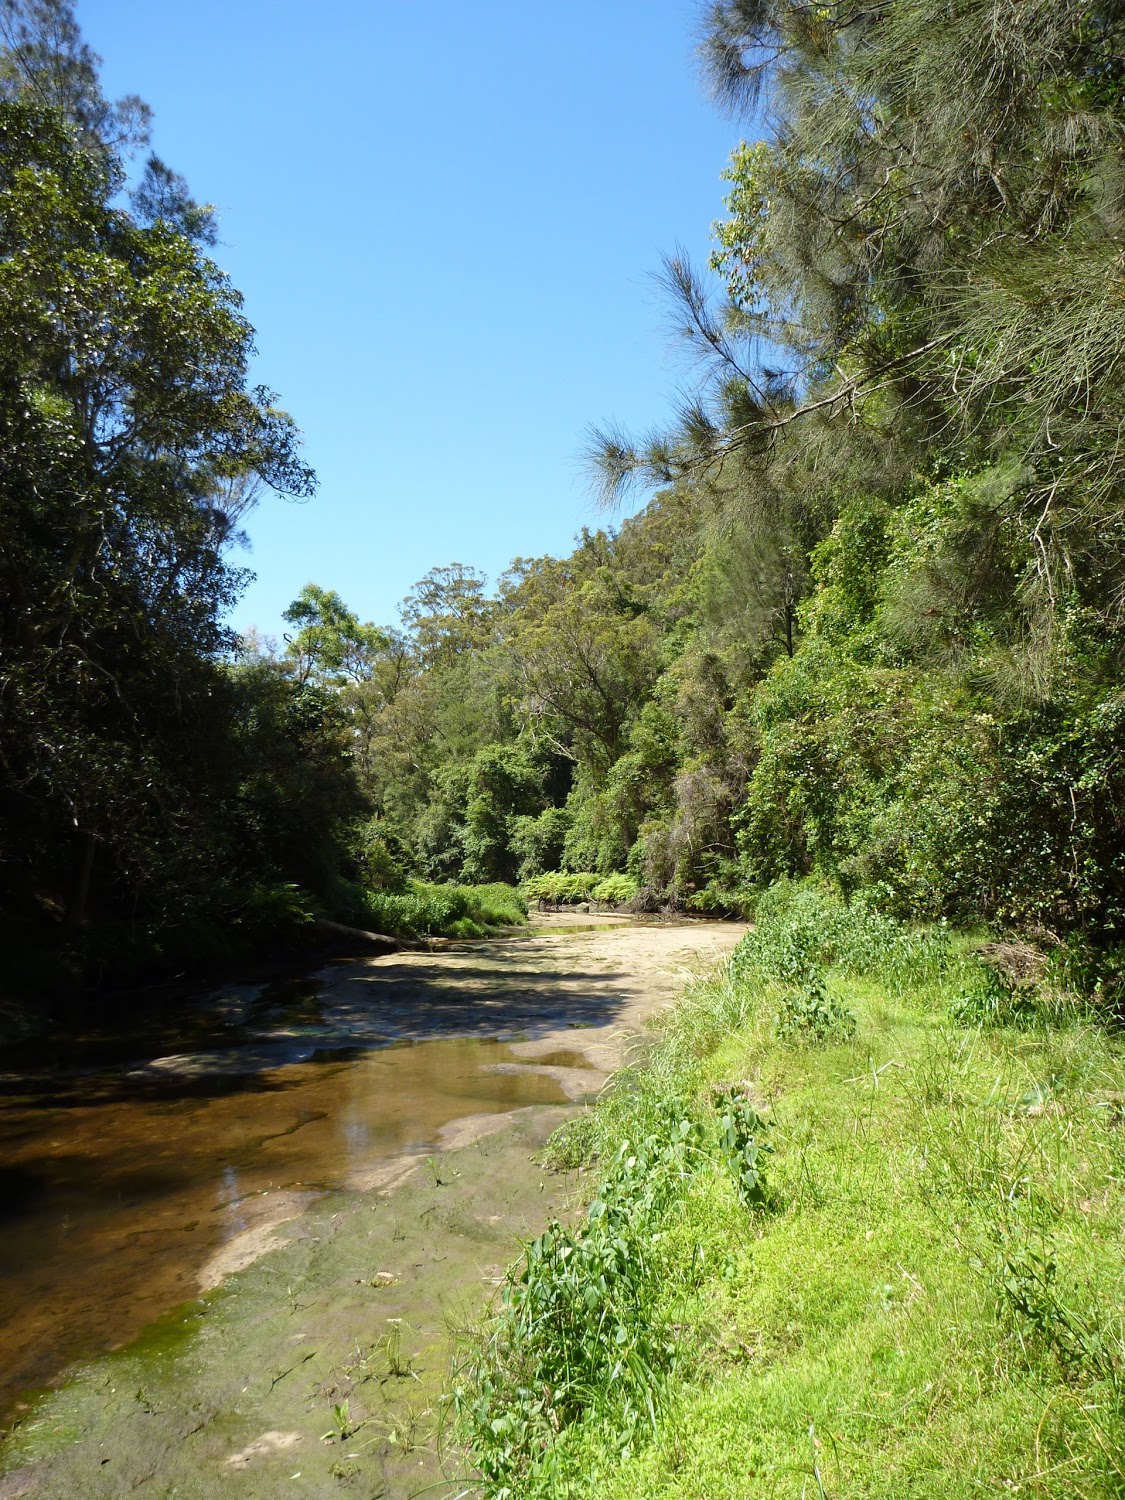 Wide sandy section of Calna Creek